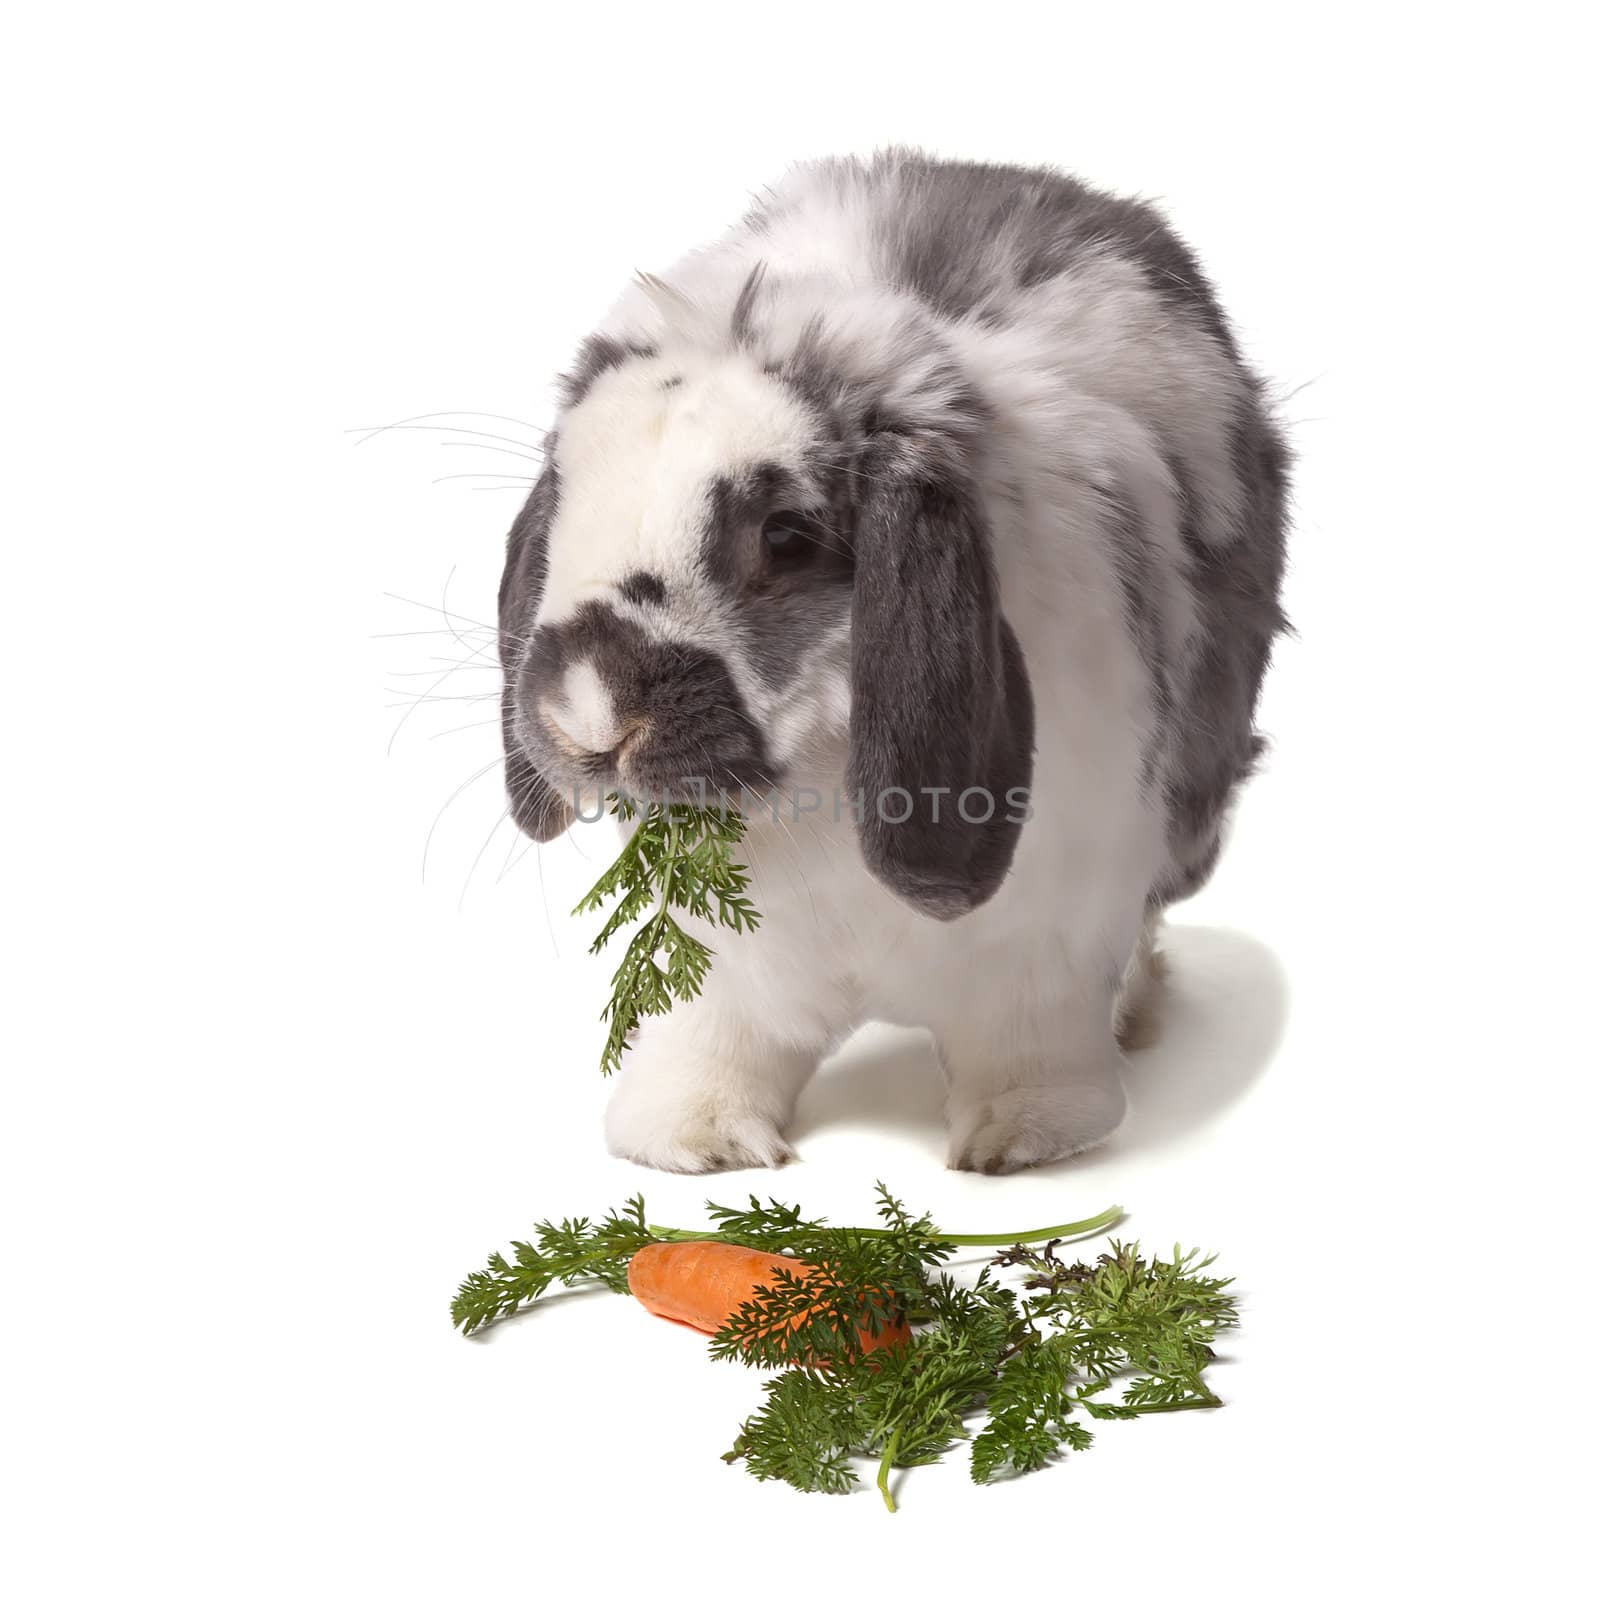 Cute Grey and White Rabbit eating Carrot and Greens by scheriton